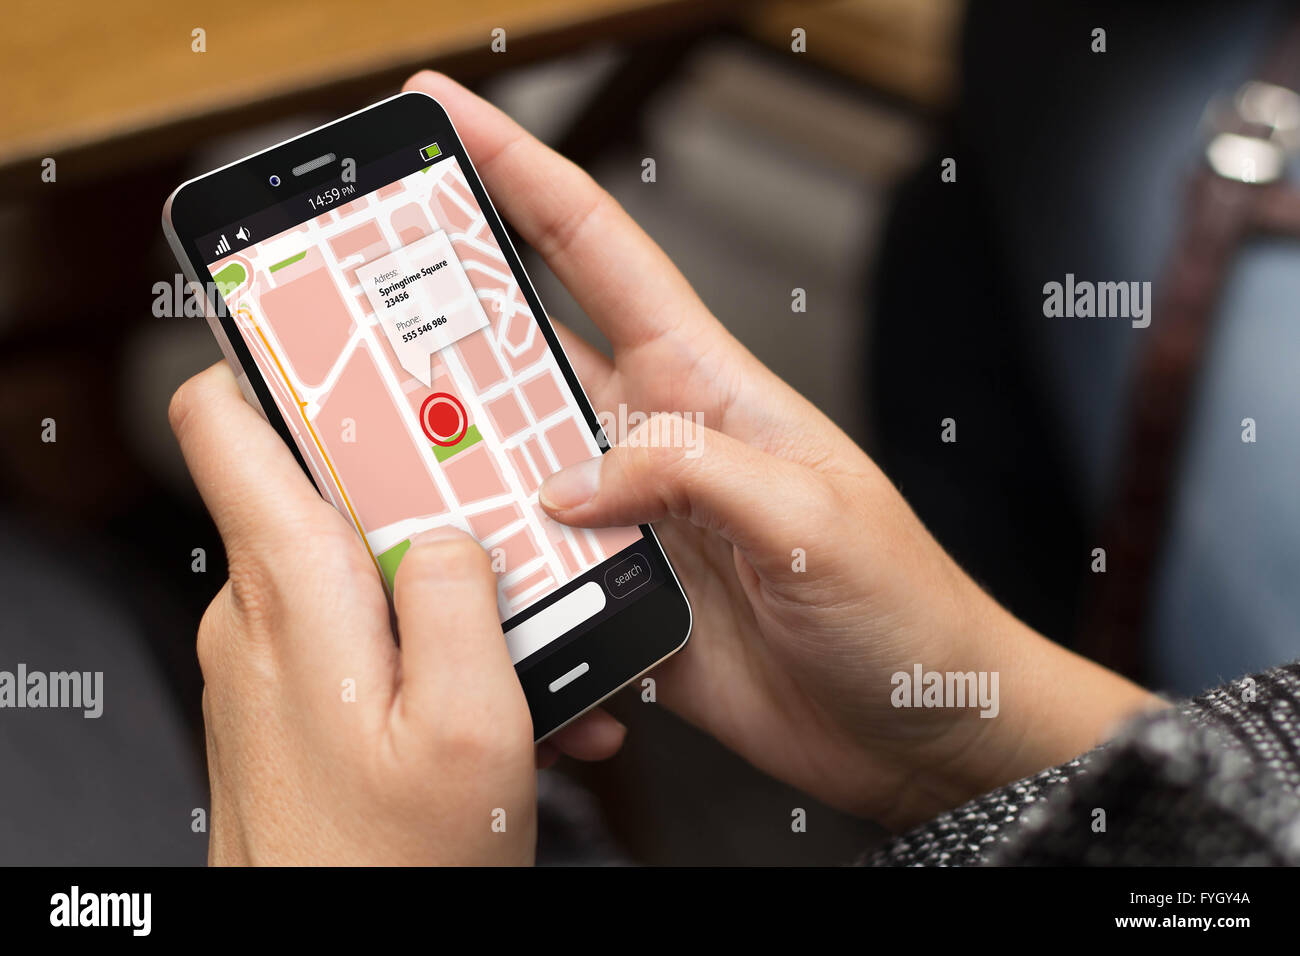 transport concept: girl using a digital generated phone with map on the screen. All screen graphics are made up. Stock Photo